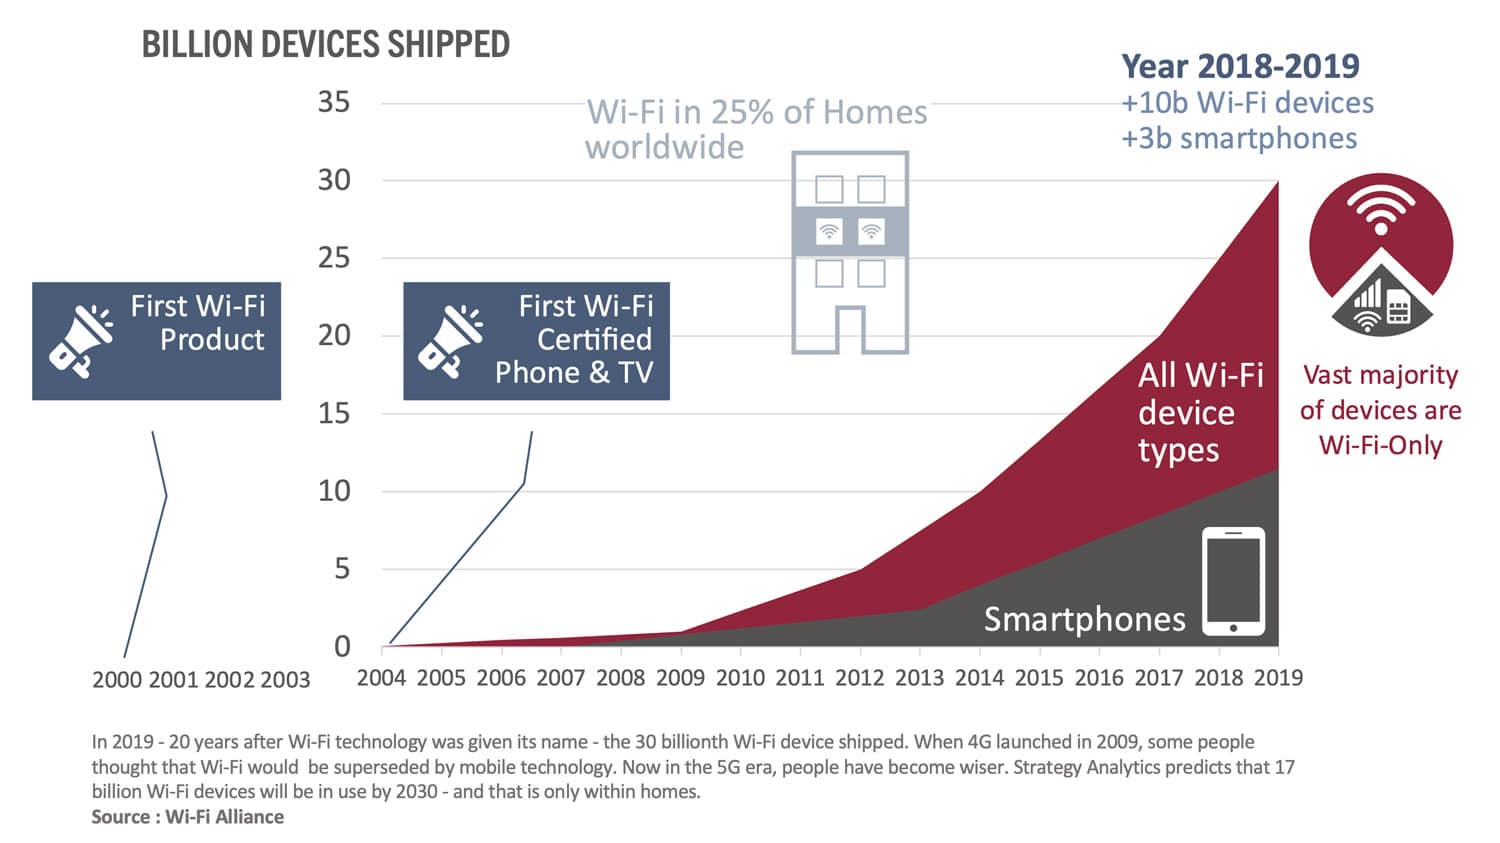 Billions of Cellular and Wi-Fi Devices shipped in 2018-2019